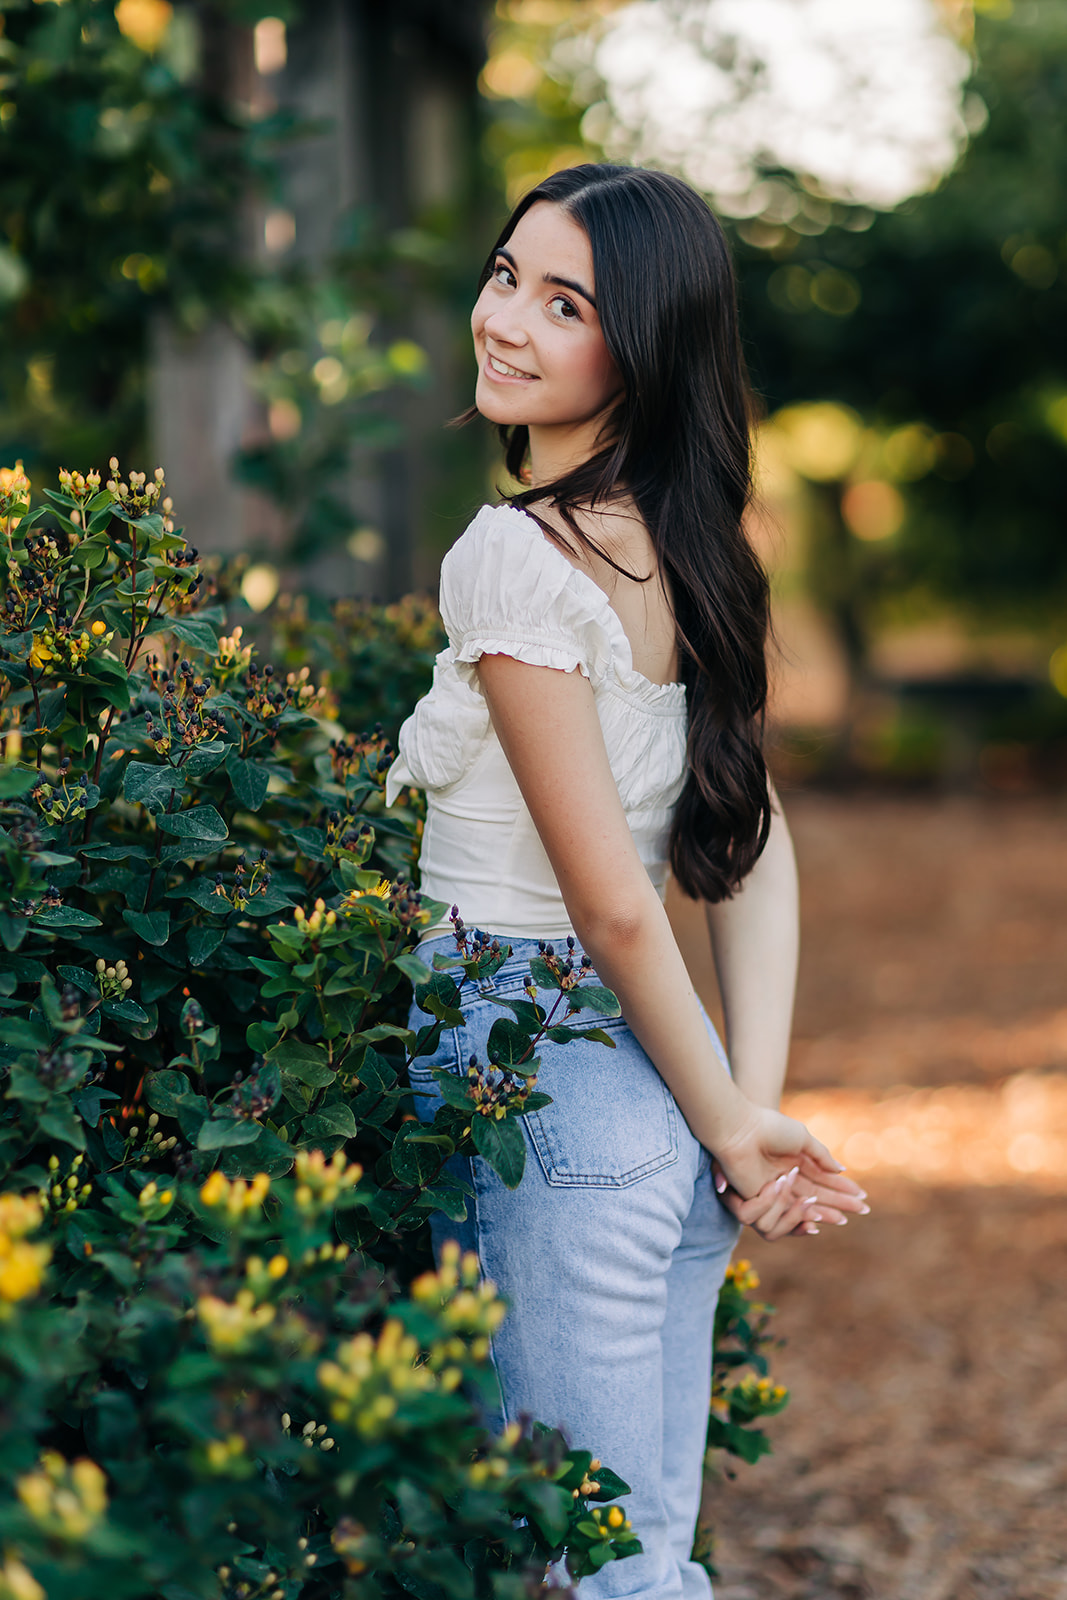 a girl standing next to some bushes posing